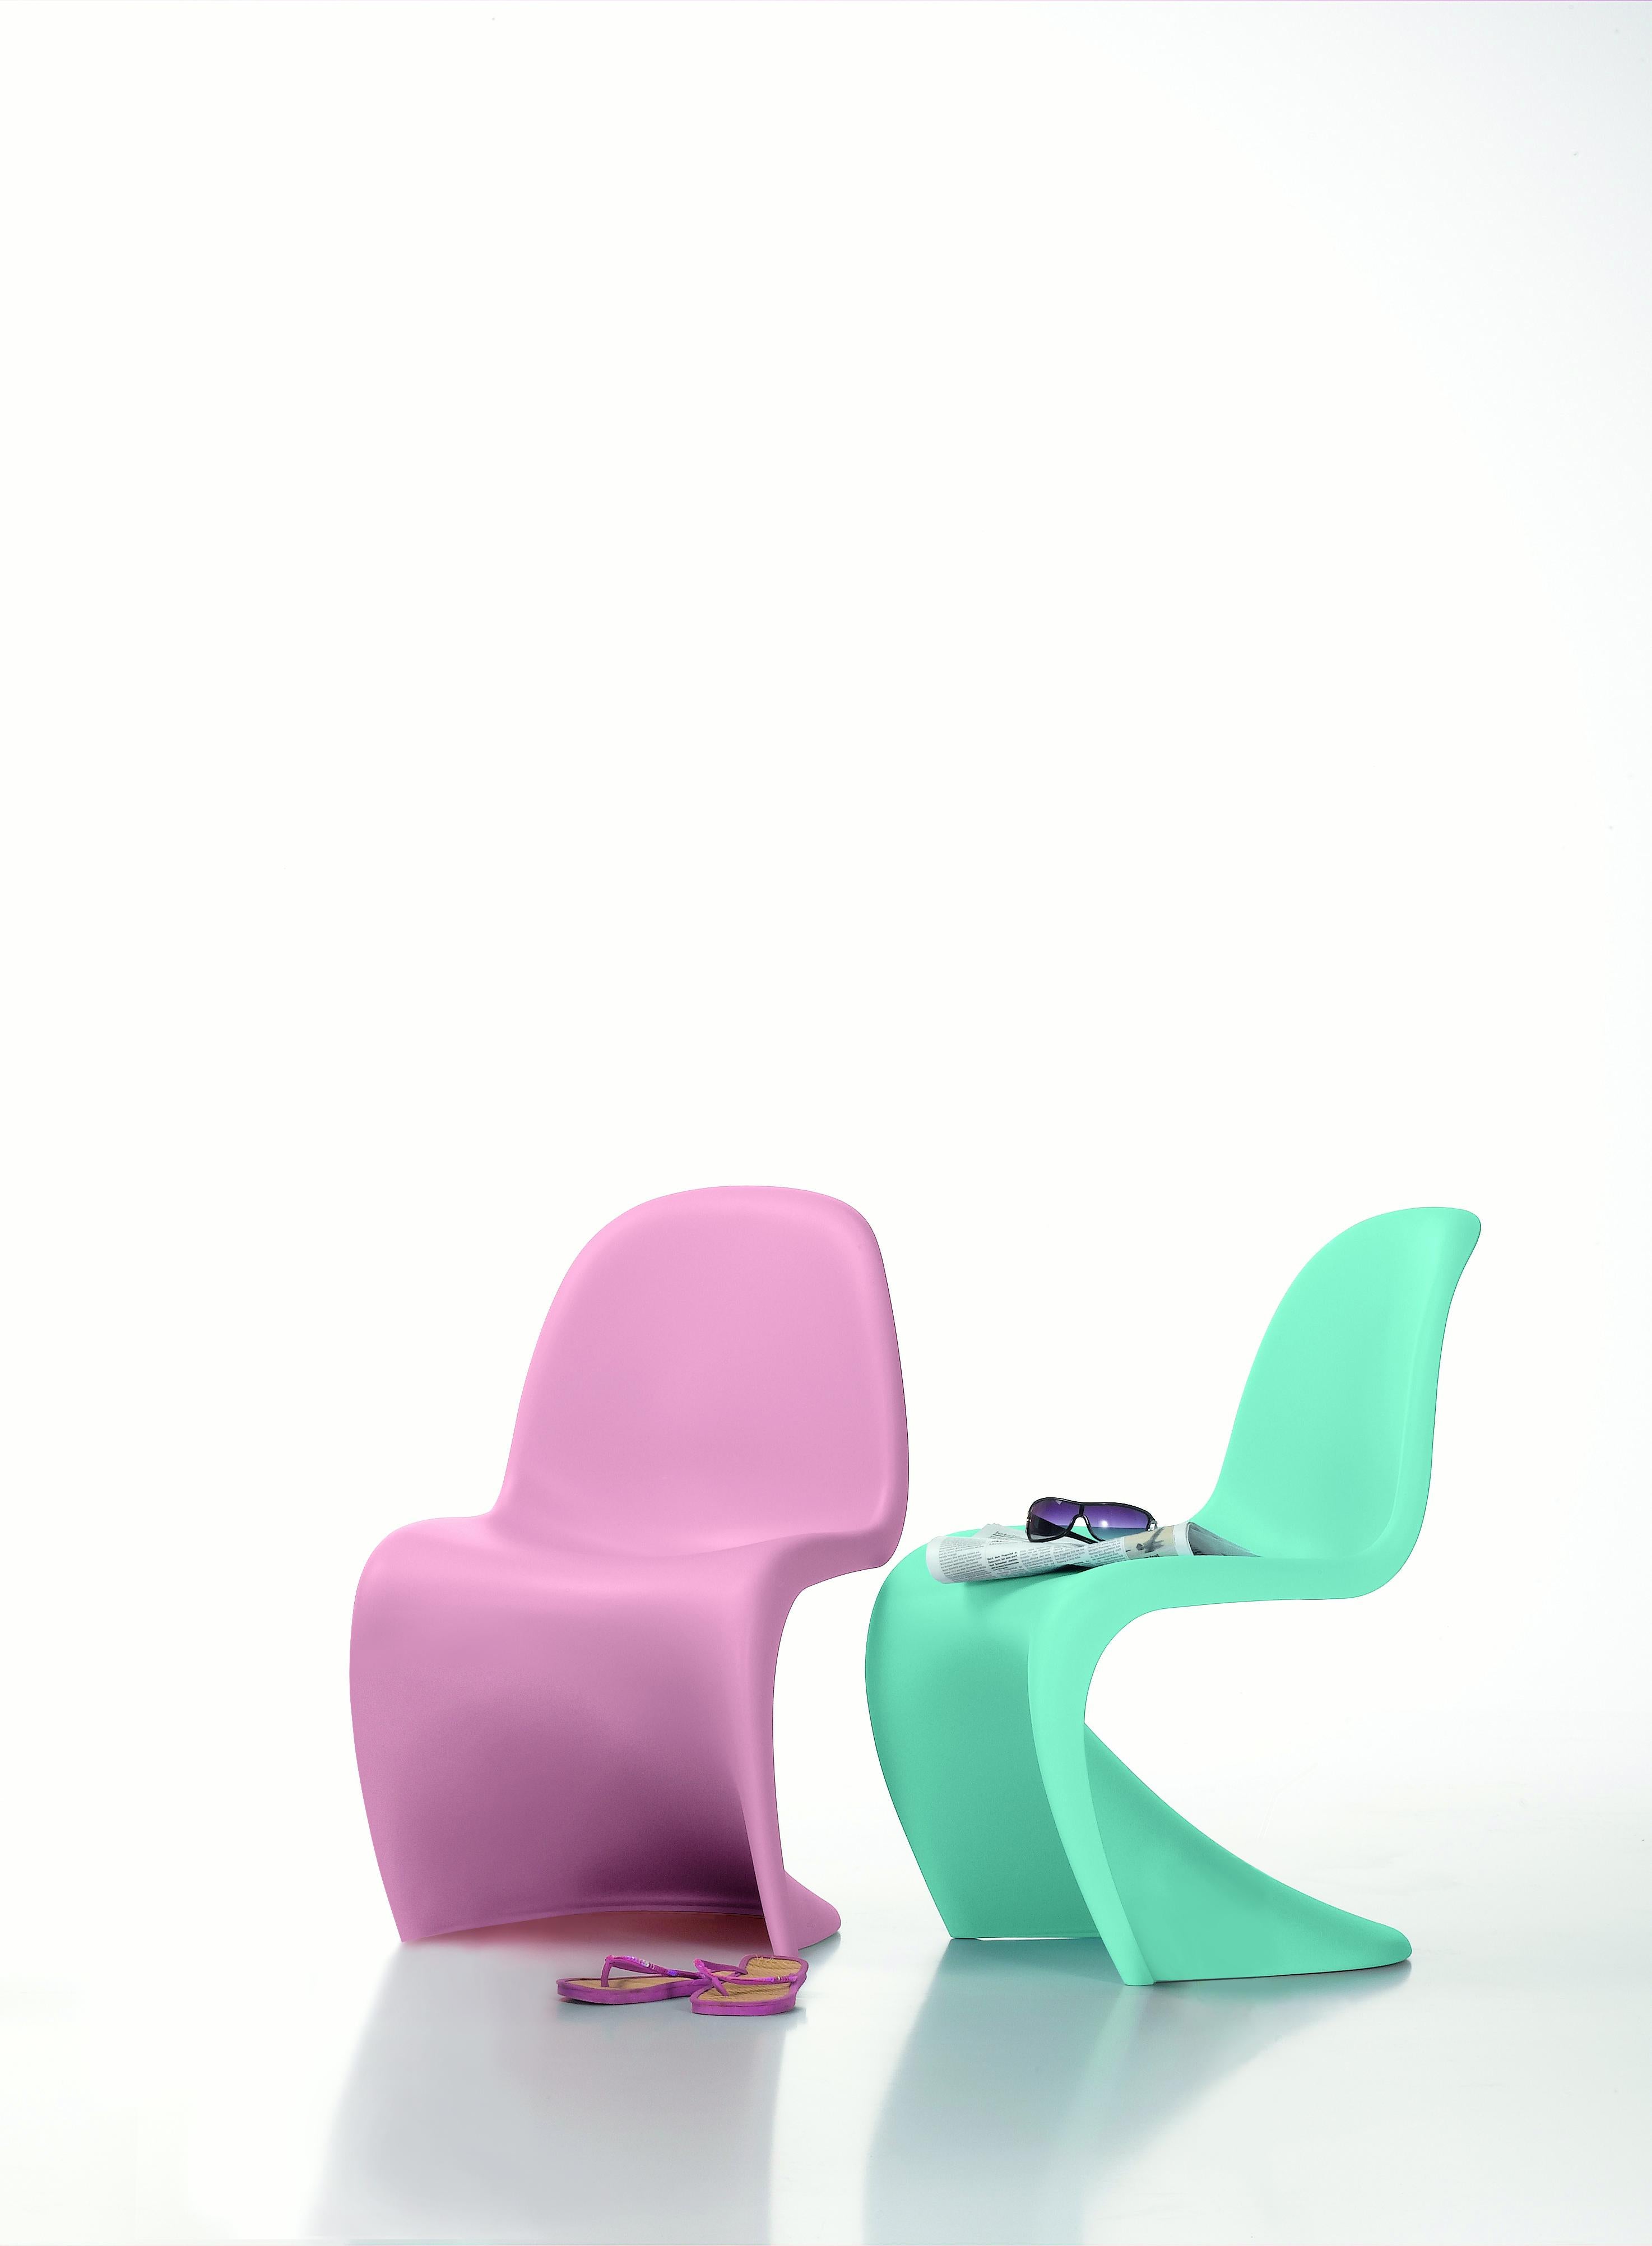 Swiss Vitra Panton Junior Chair in White by Verner Panton For Sale